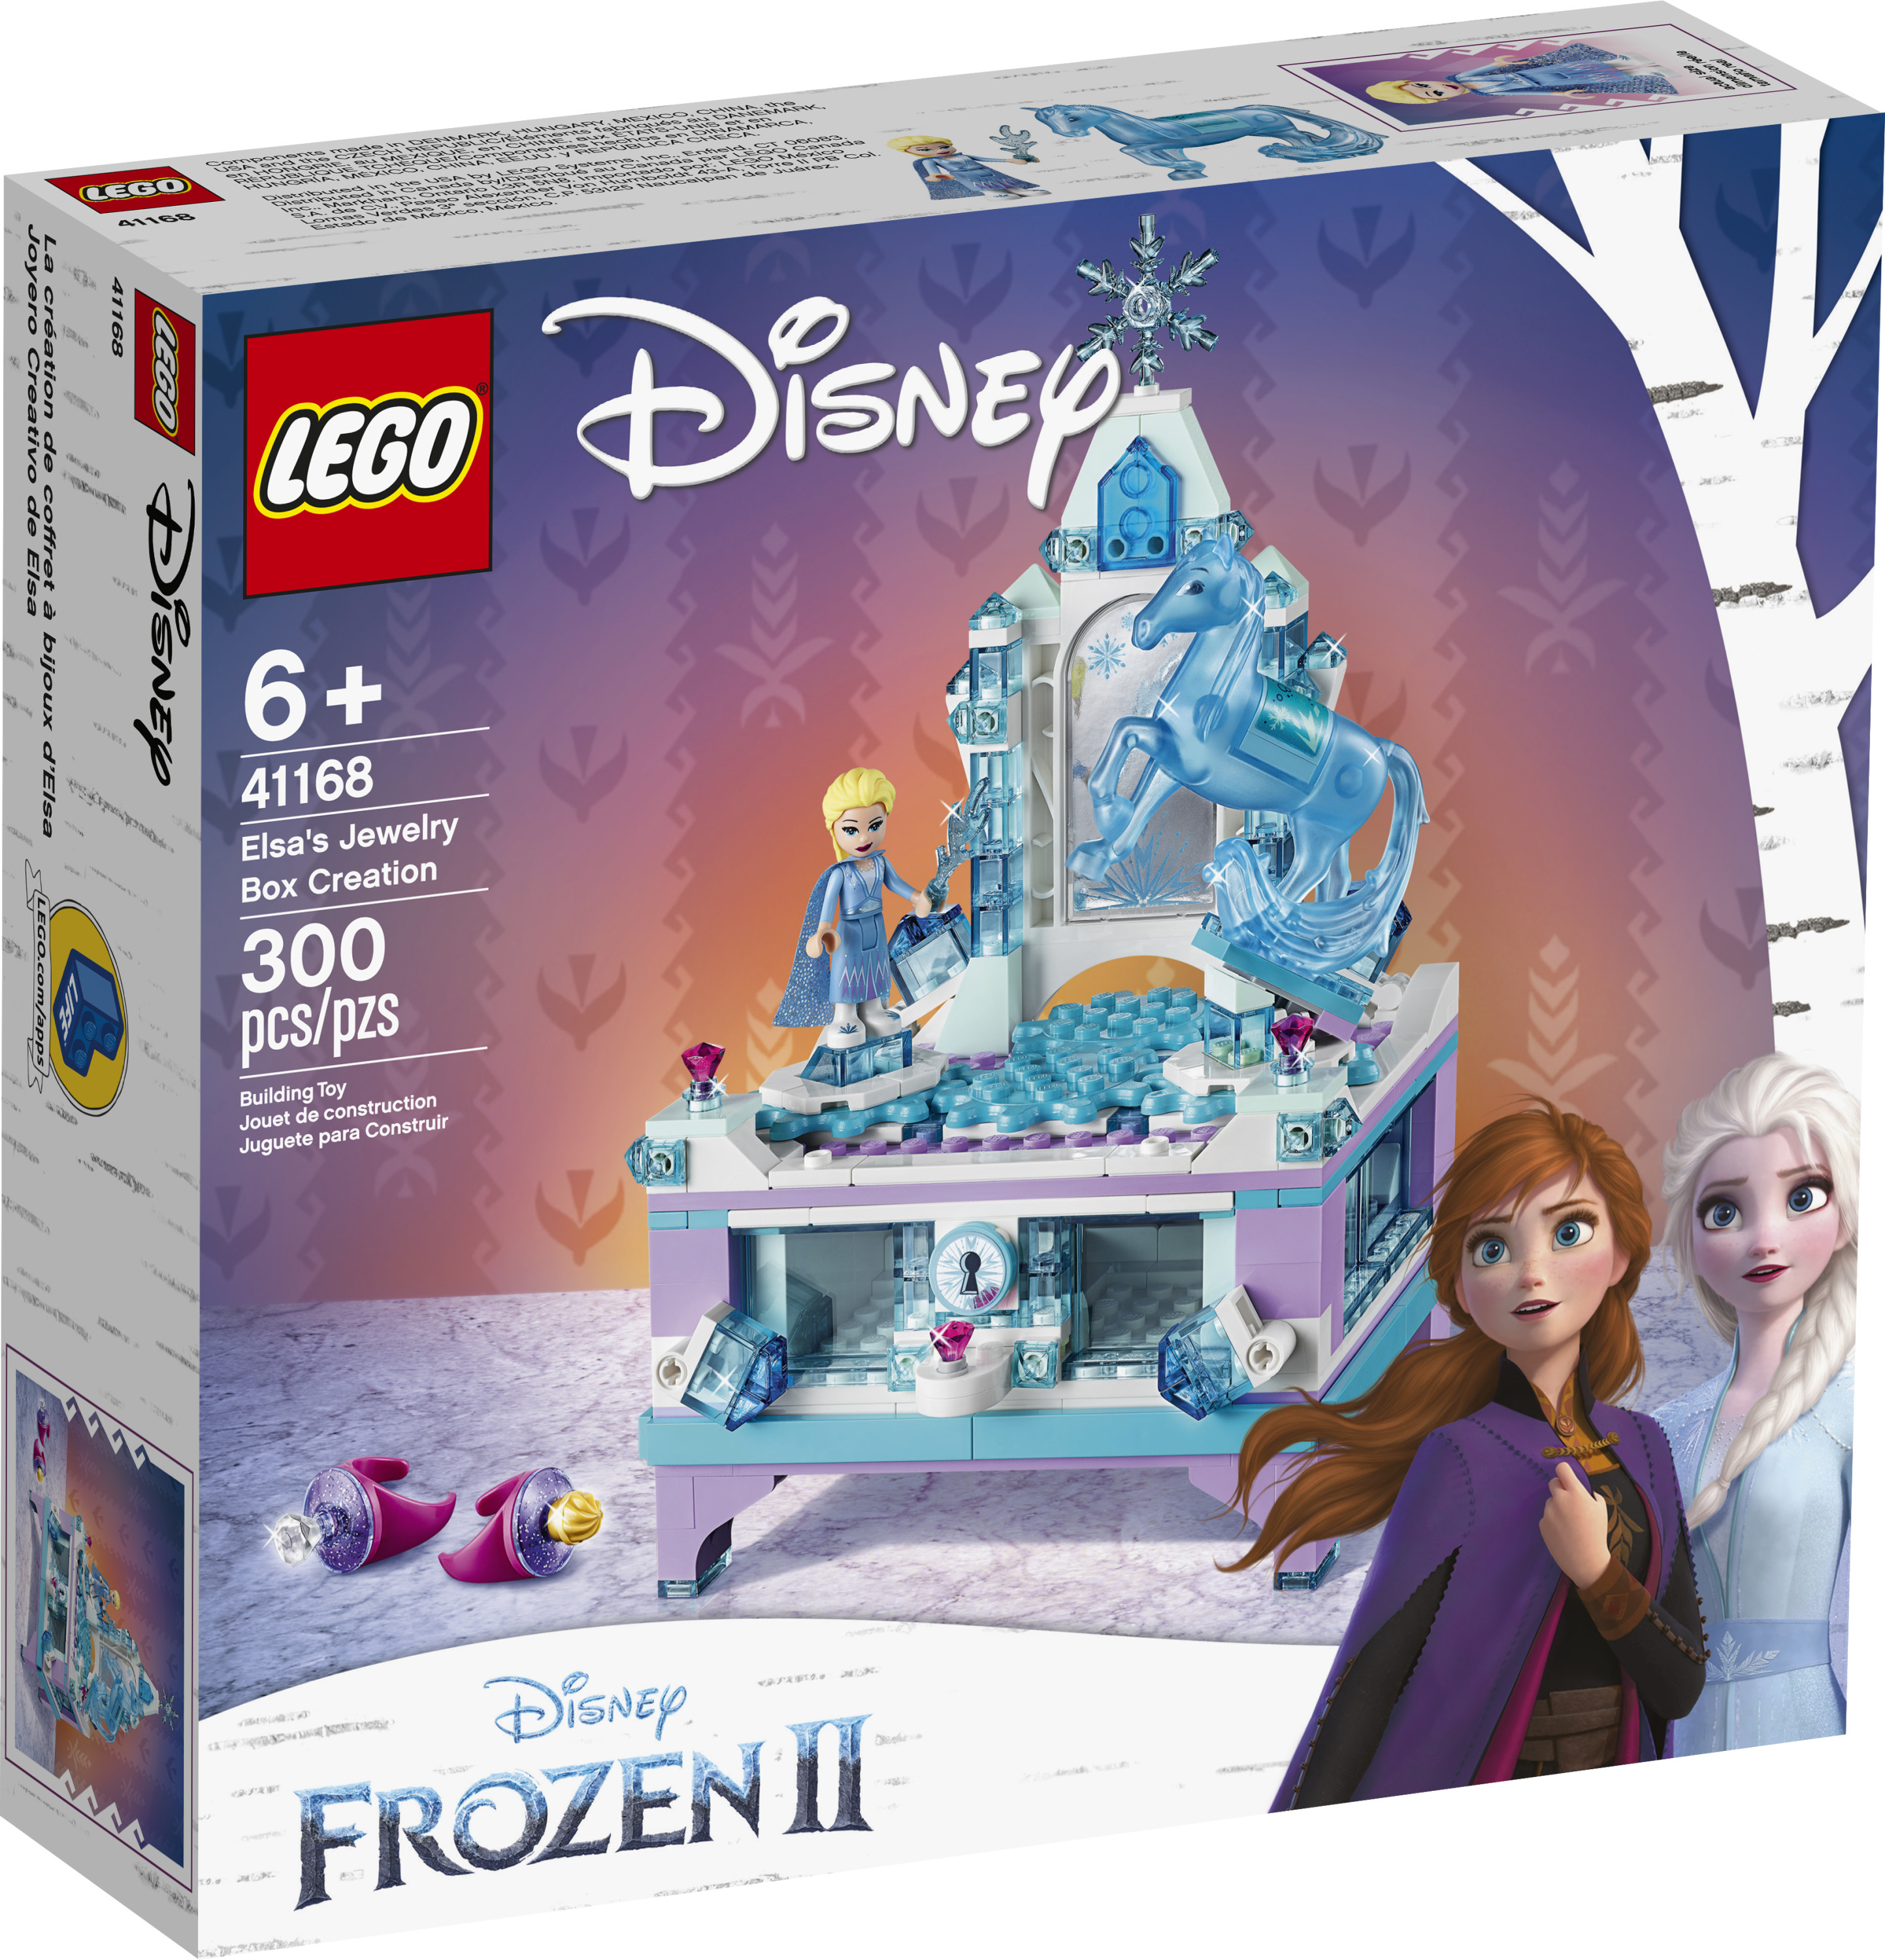 LEGO Disney Frozen 2 Elsa's Jewelry Box Creation 41168, Collectible Frozen Toy with Princess Elsa Mini-Doll and Nokk Figure, Kids Can Build a Jewelry Box with Lockable Drawer & Mirror, Disney Gift - image 3 of 8